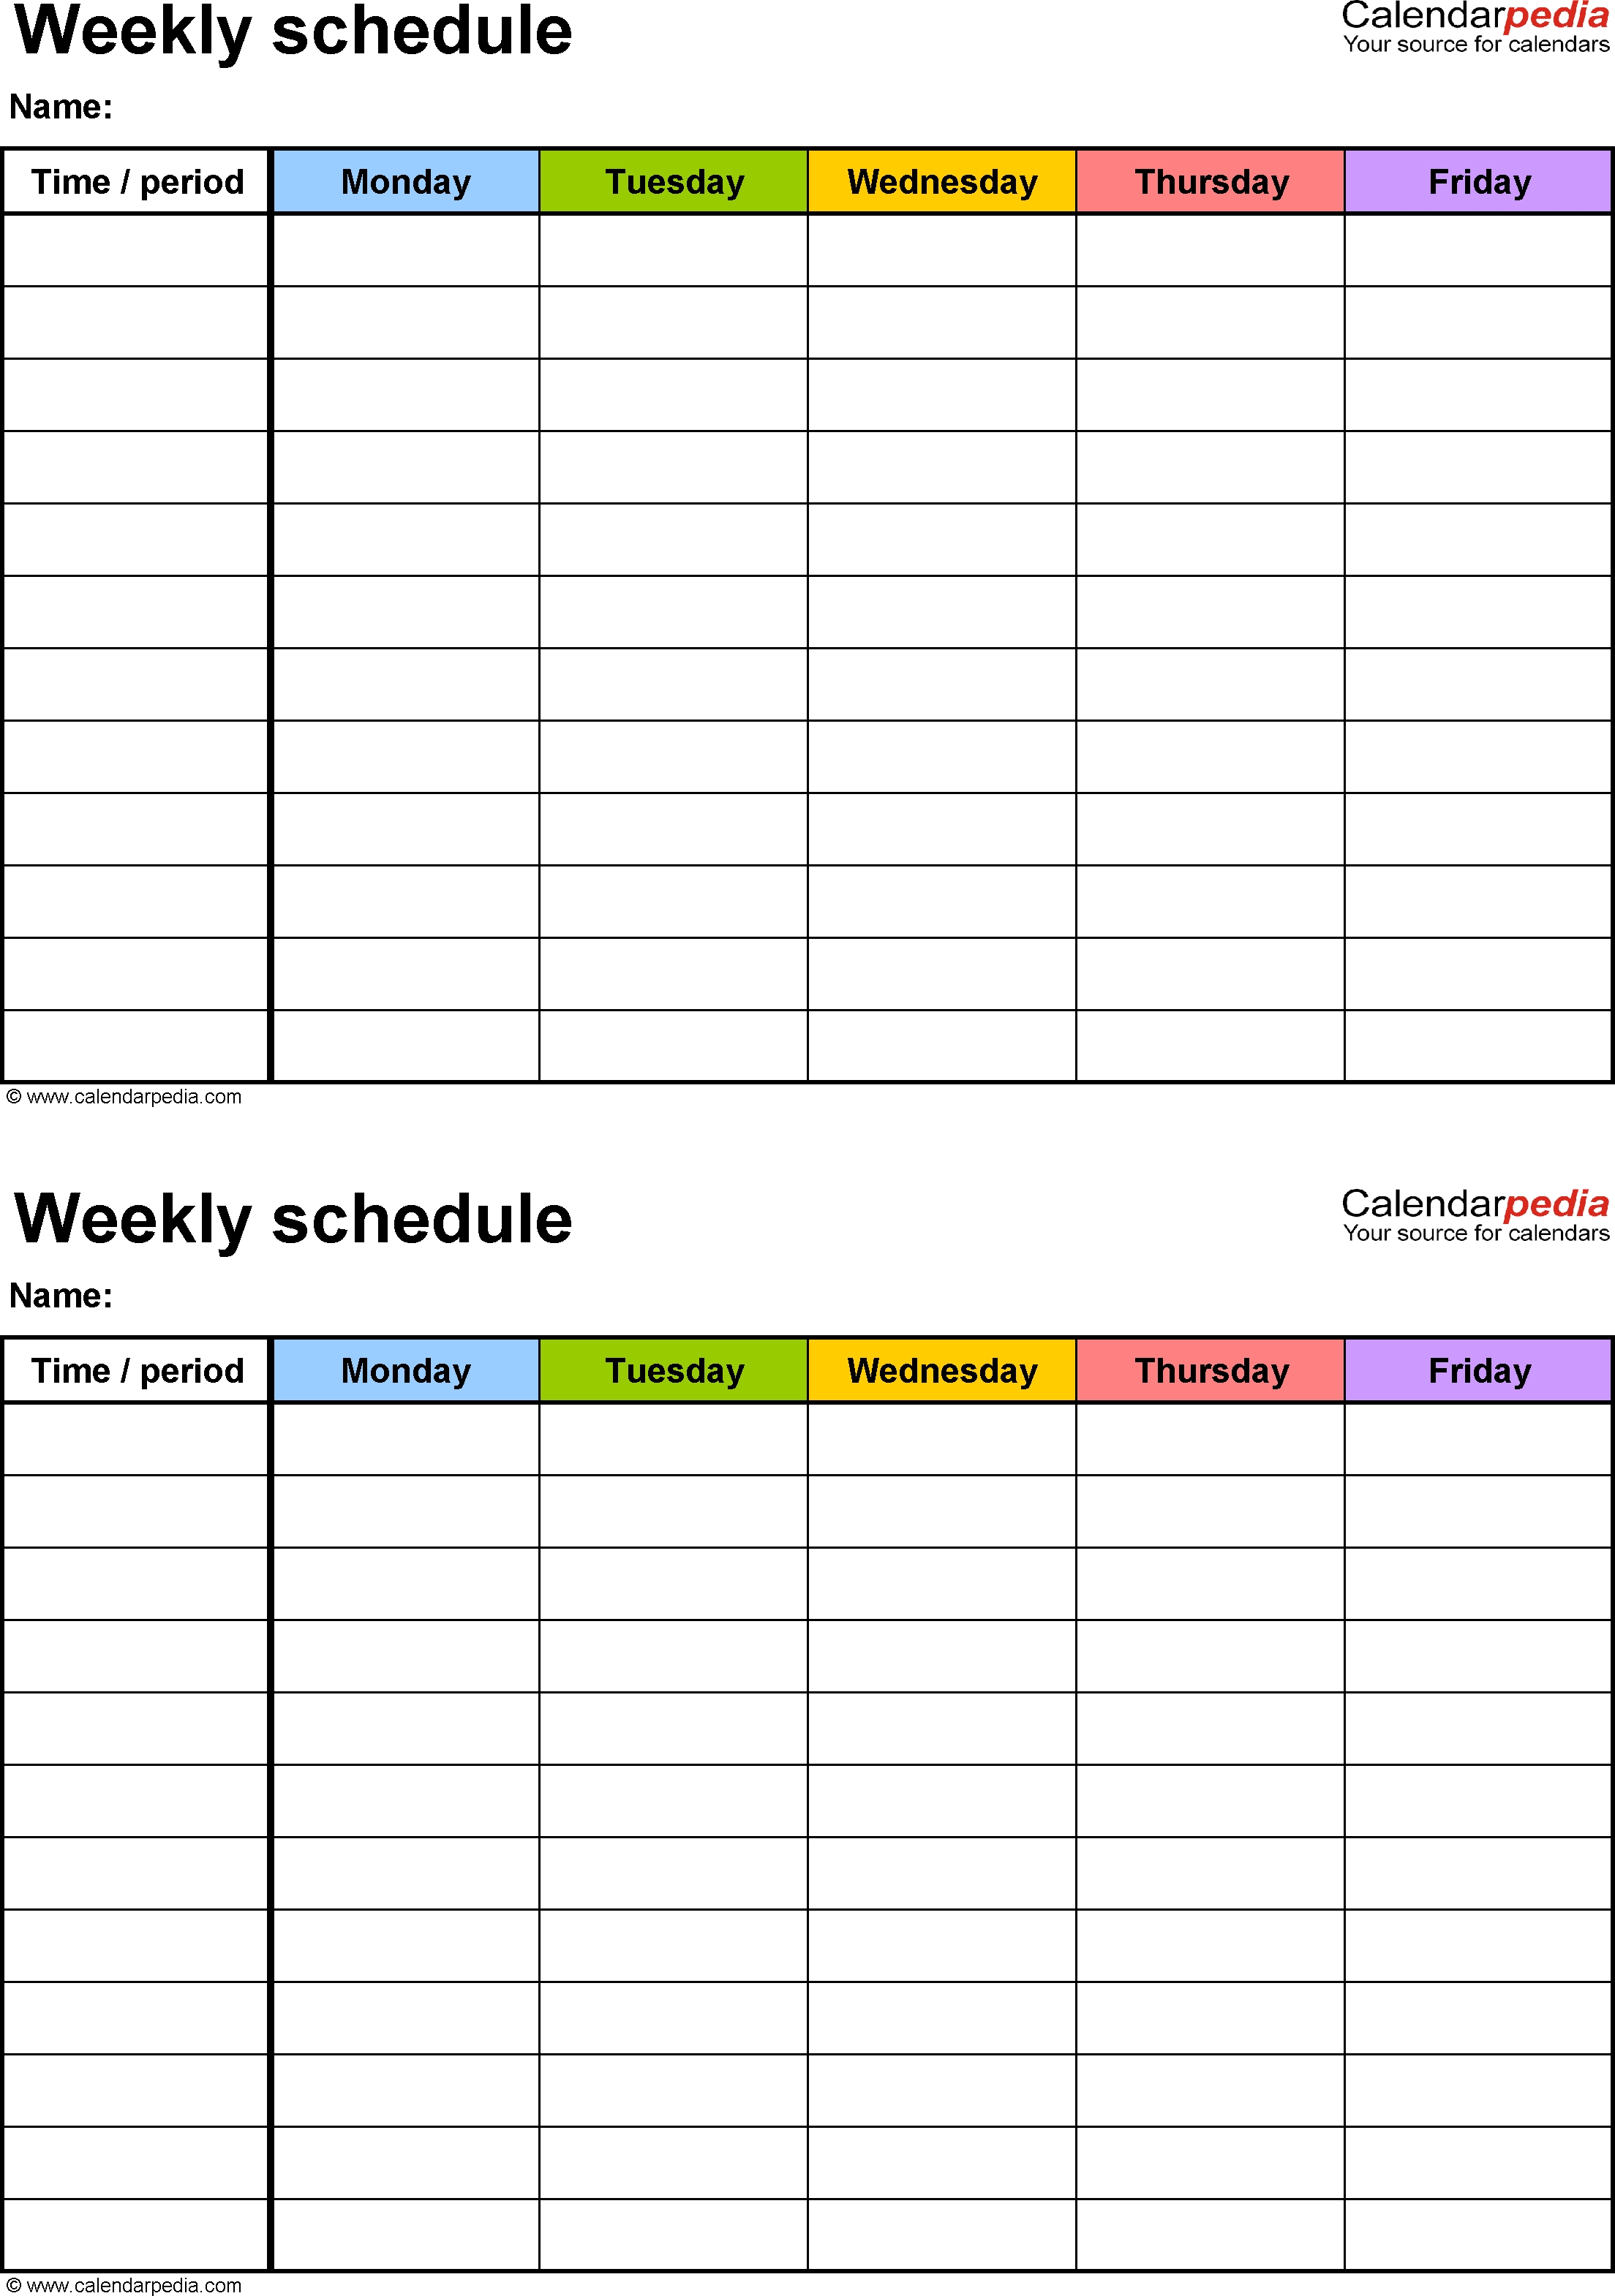 Free Weekly Schedule Templates For Word - 18 Templates for 5 Day Planner Template Free